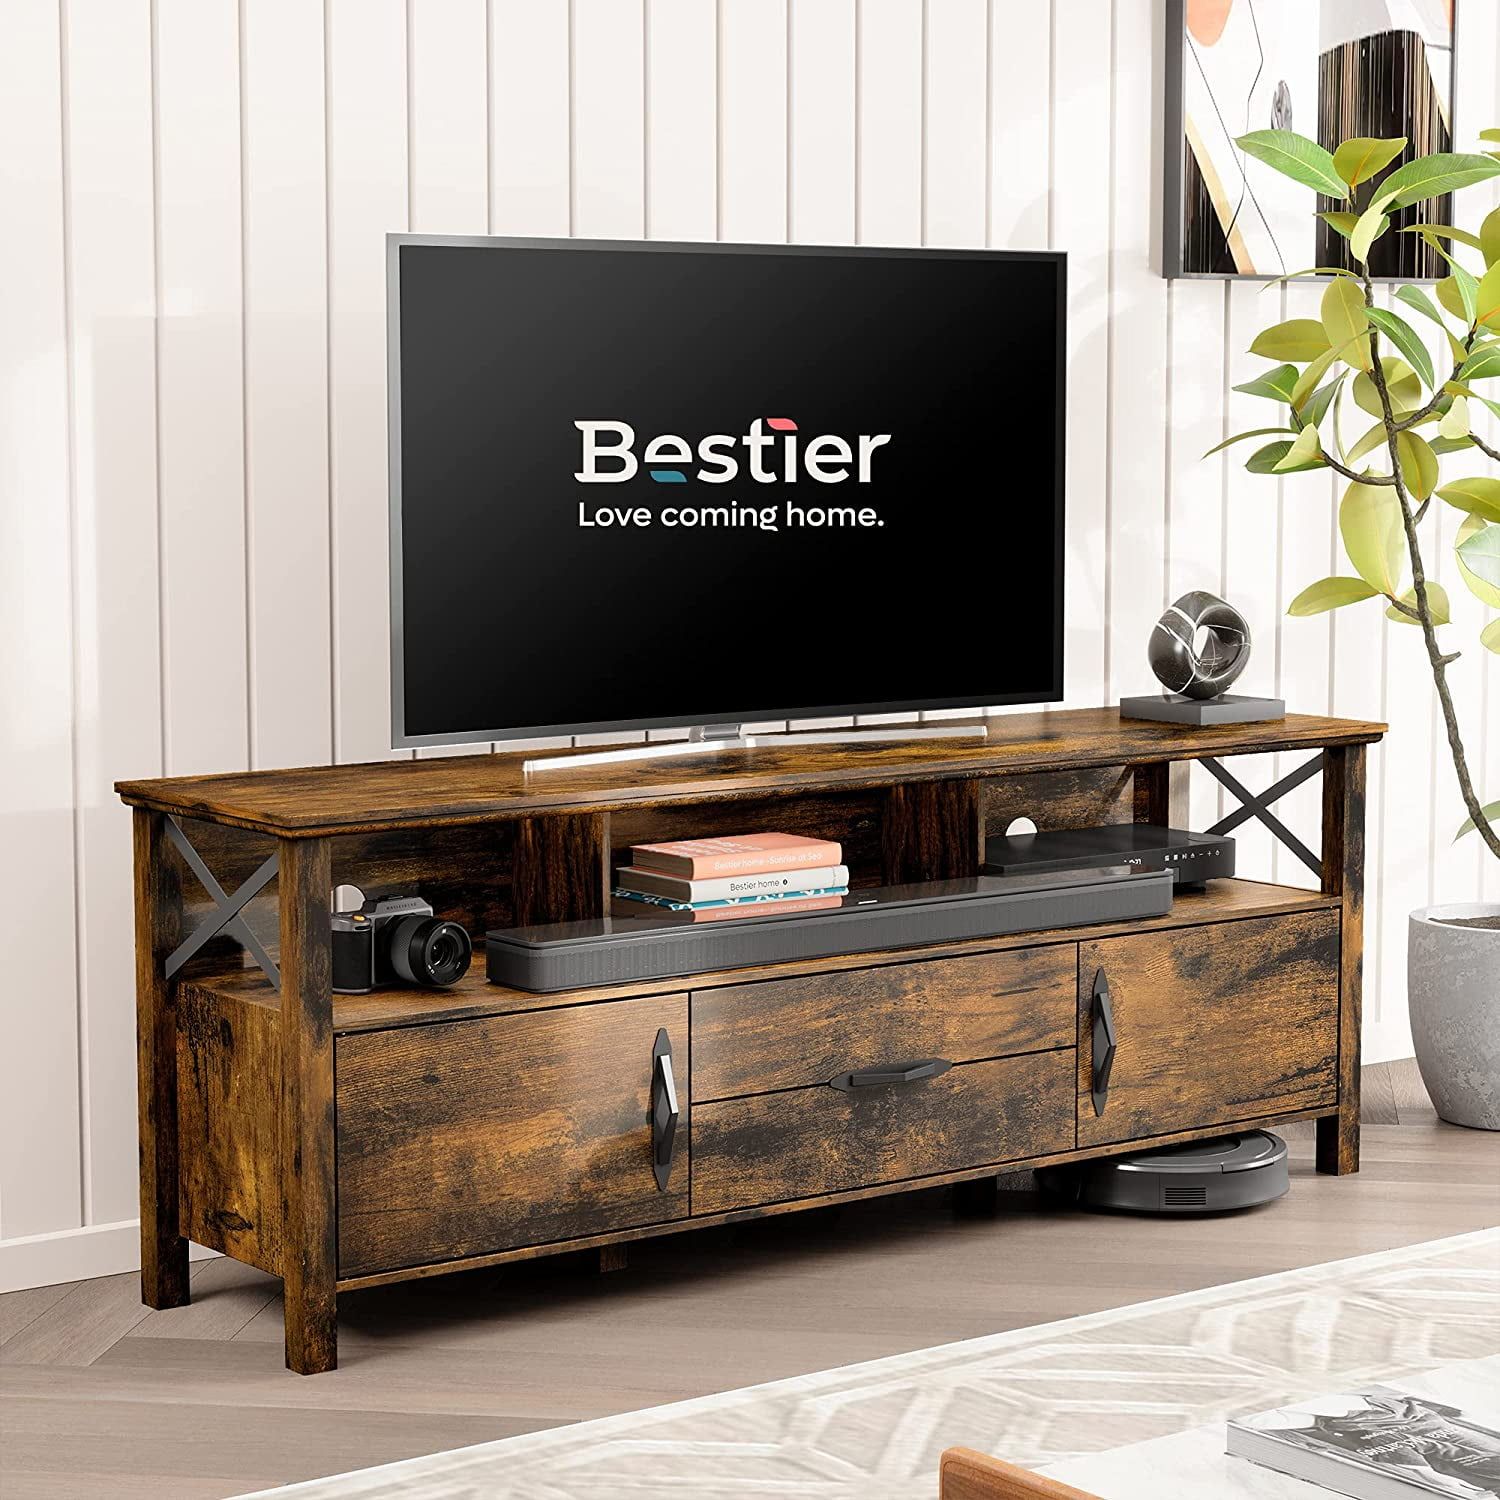 Bestier Tv Stand For Tv Up To 70 Inch, Tv Cabinet With Wooden Drawer With Regard To Dual Use Storage Cabinet Tv Stands (View 3 of 20)